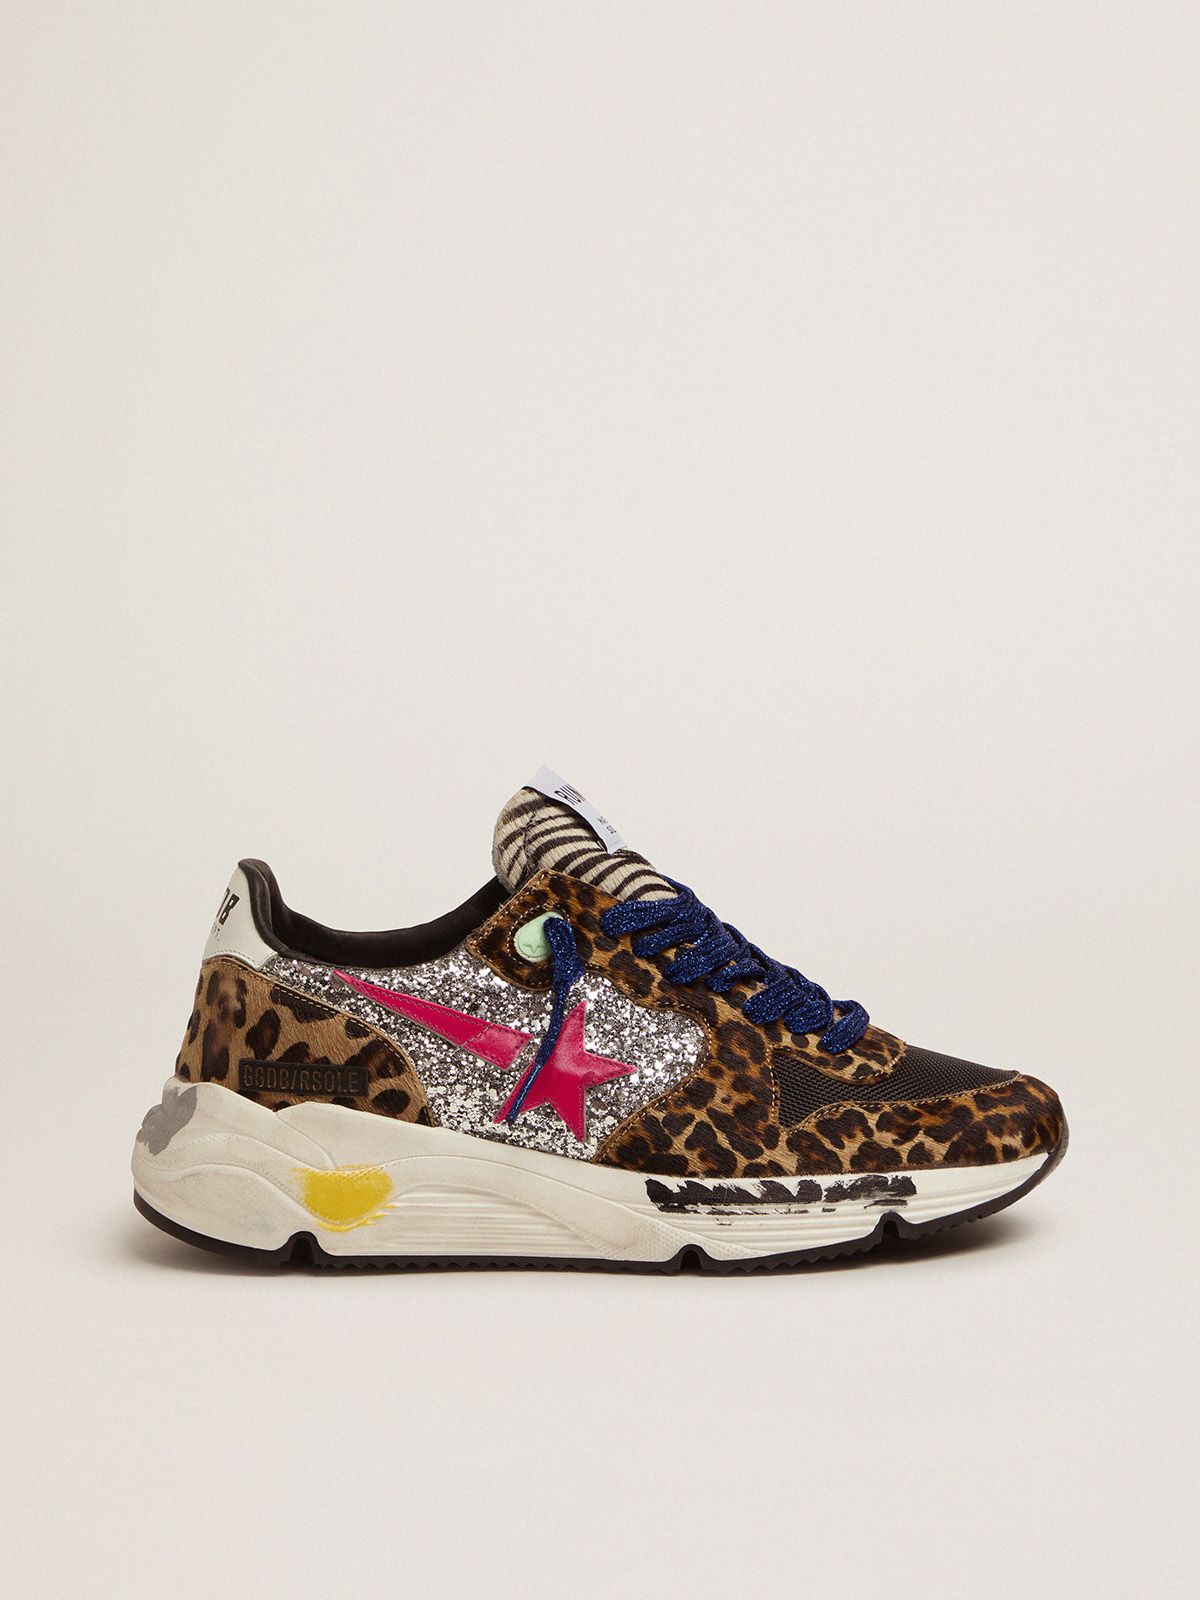 Golden Goose Ball Star Uomo Running Sole sneakers in leopard-print pony skin with silver glitter inserts.